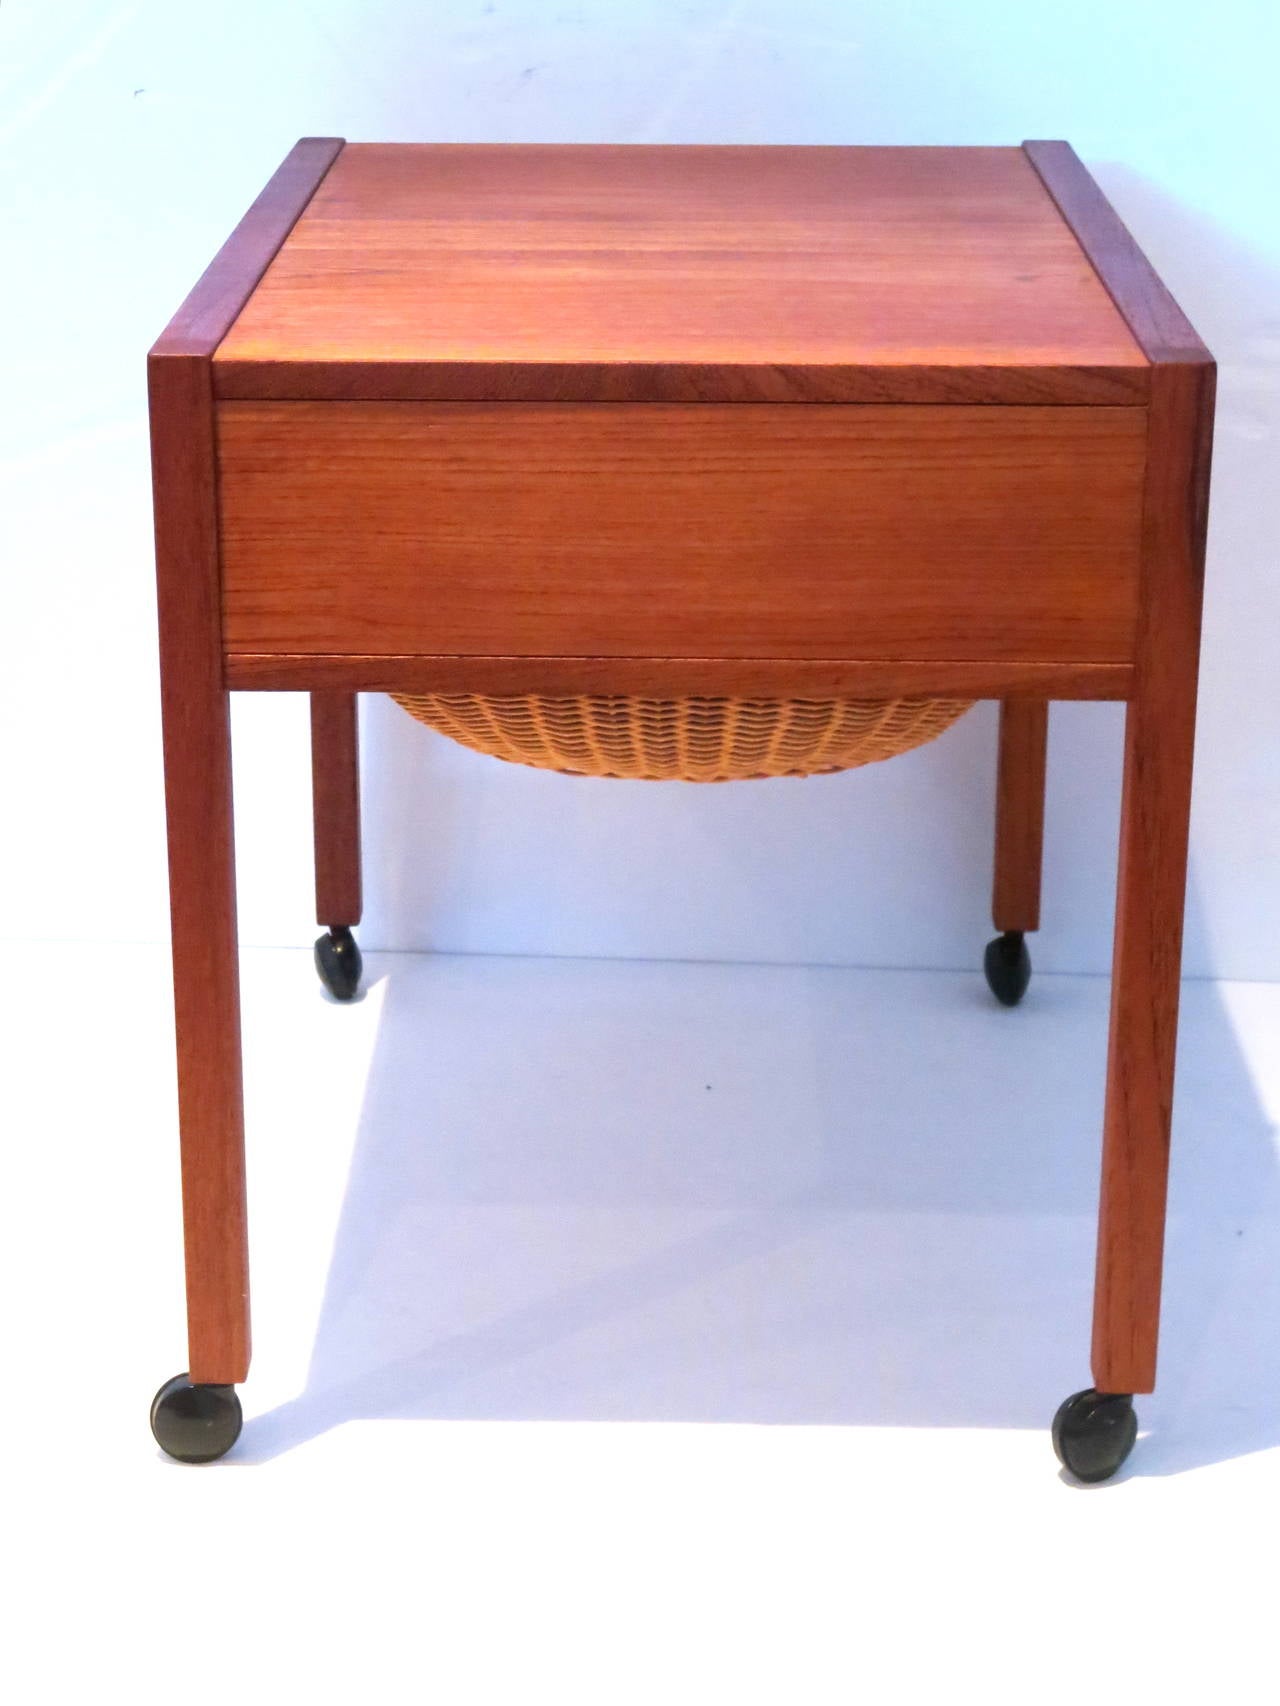 A very rare sewing table by Arne Wahl Iversen, in solid teak made in Denmark refinished very nice condition. Great craftsmanship.